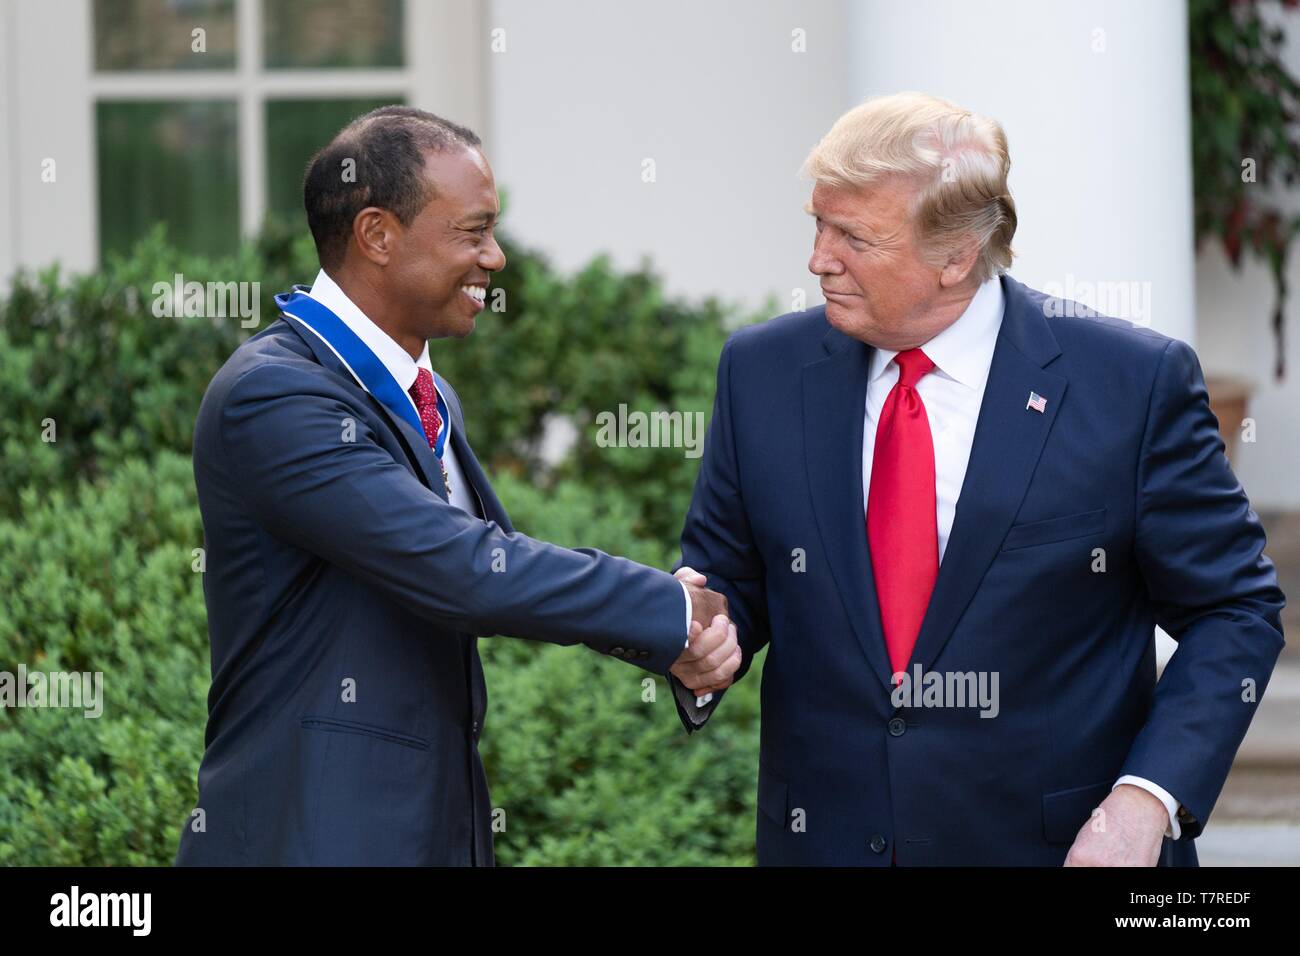 U.S President Donald Trump congratulates golfer Tiger Woods following the presentation of the Presidential Medal of Freedom in the Rose Garden of the White House May 6, 2019 in Washington, DC. Stock Photo